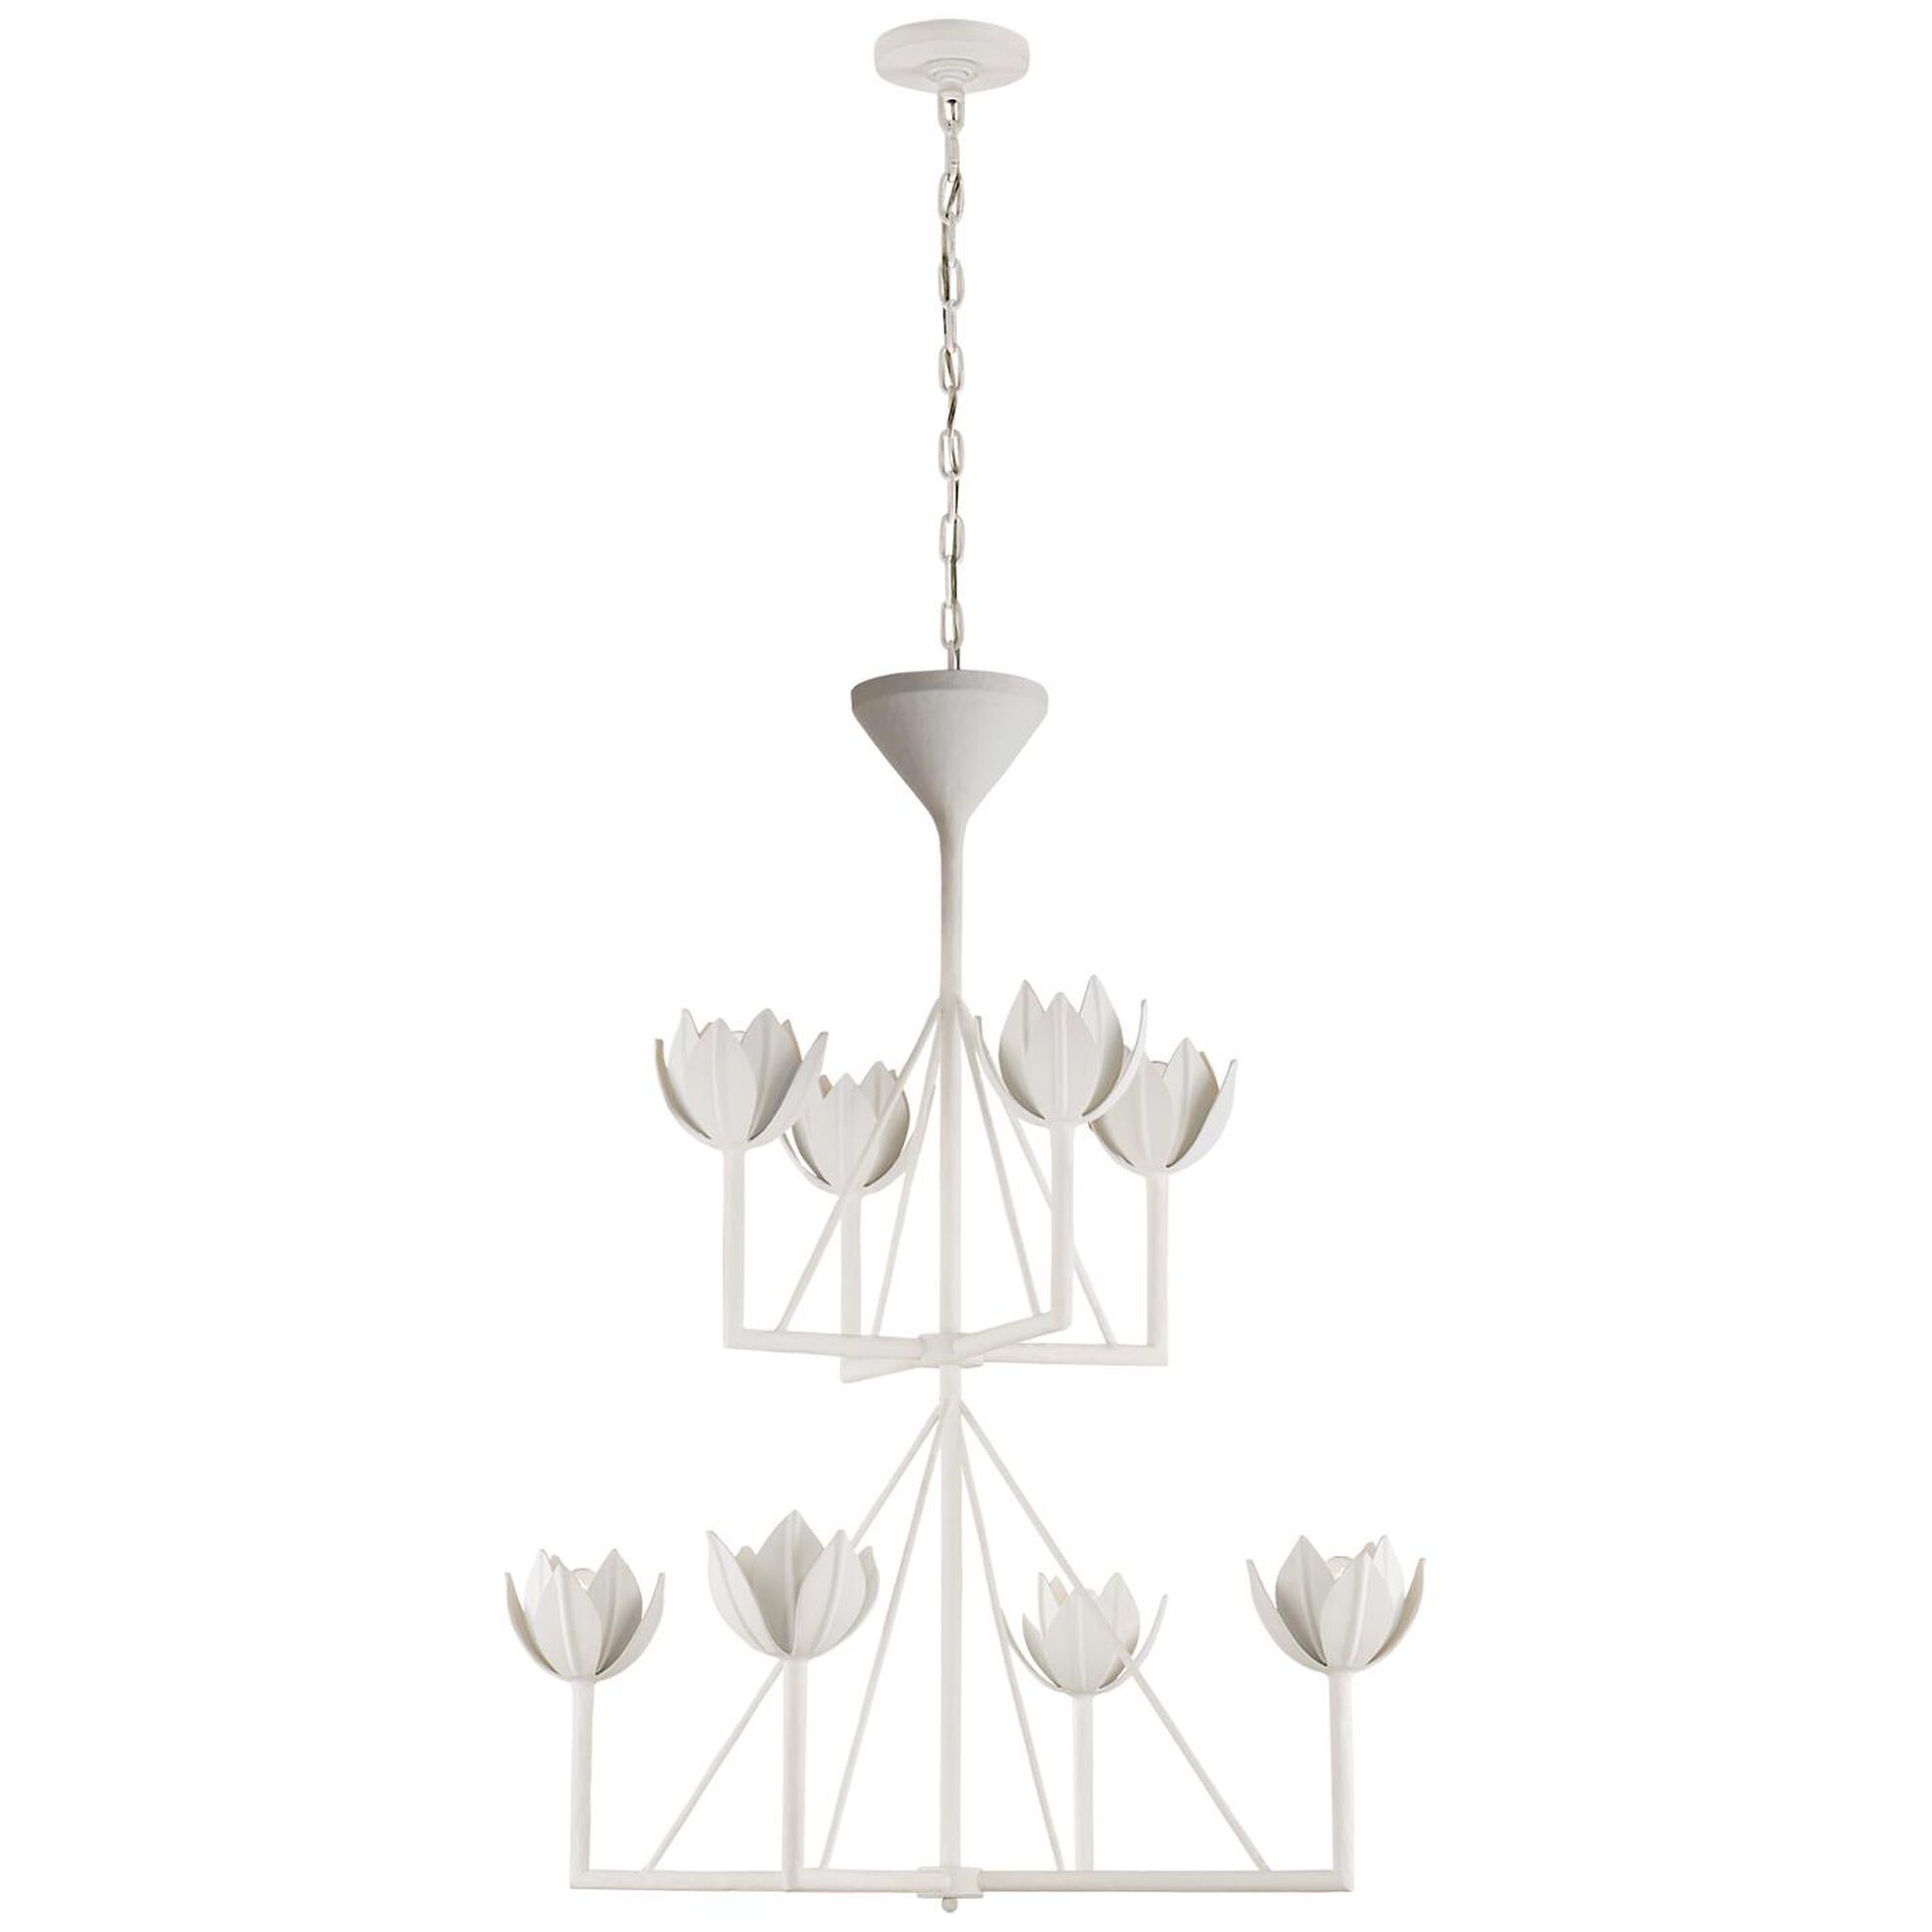 Julie Neill Alberto 33 Inch 8 Light Chandelier by Visual Comfort and Co. | Capitol Lighting 1800lighting.com